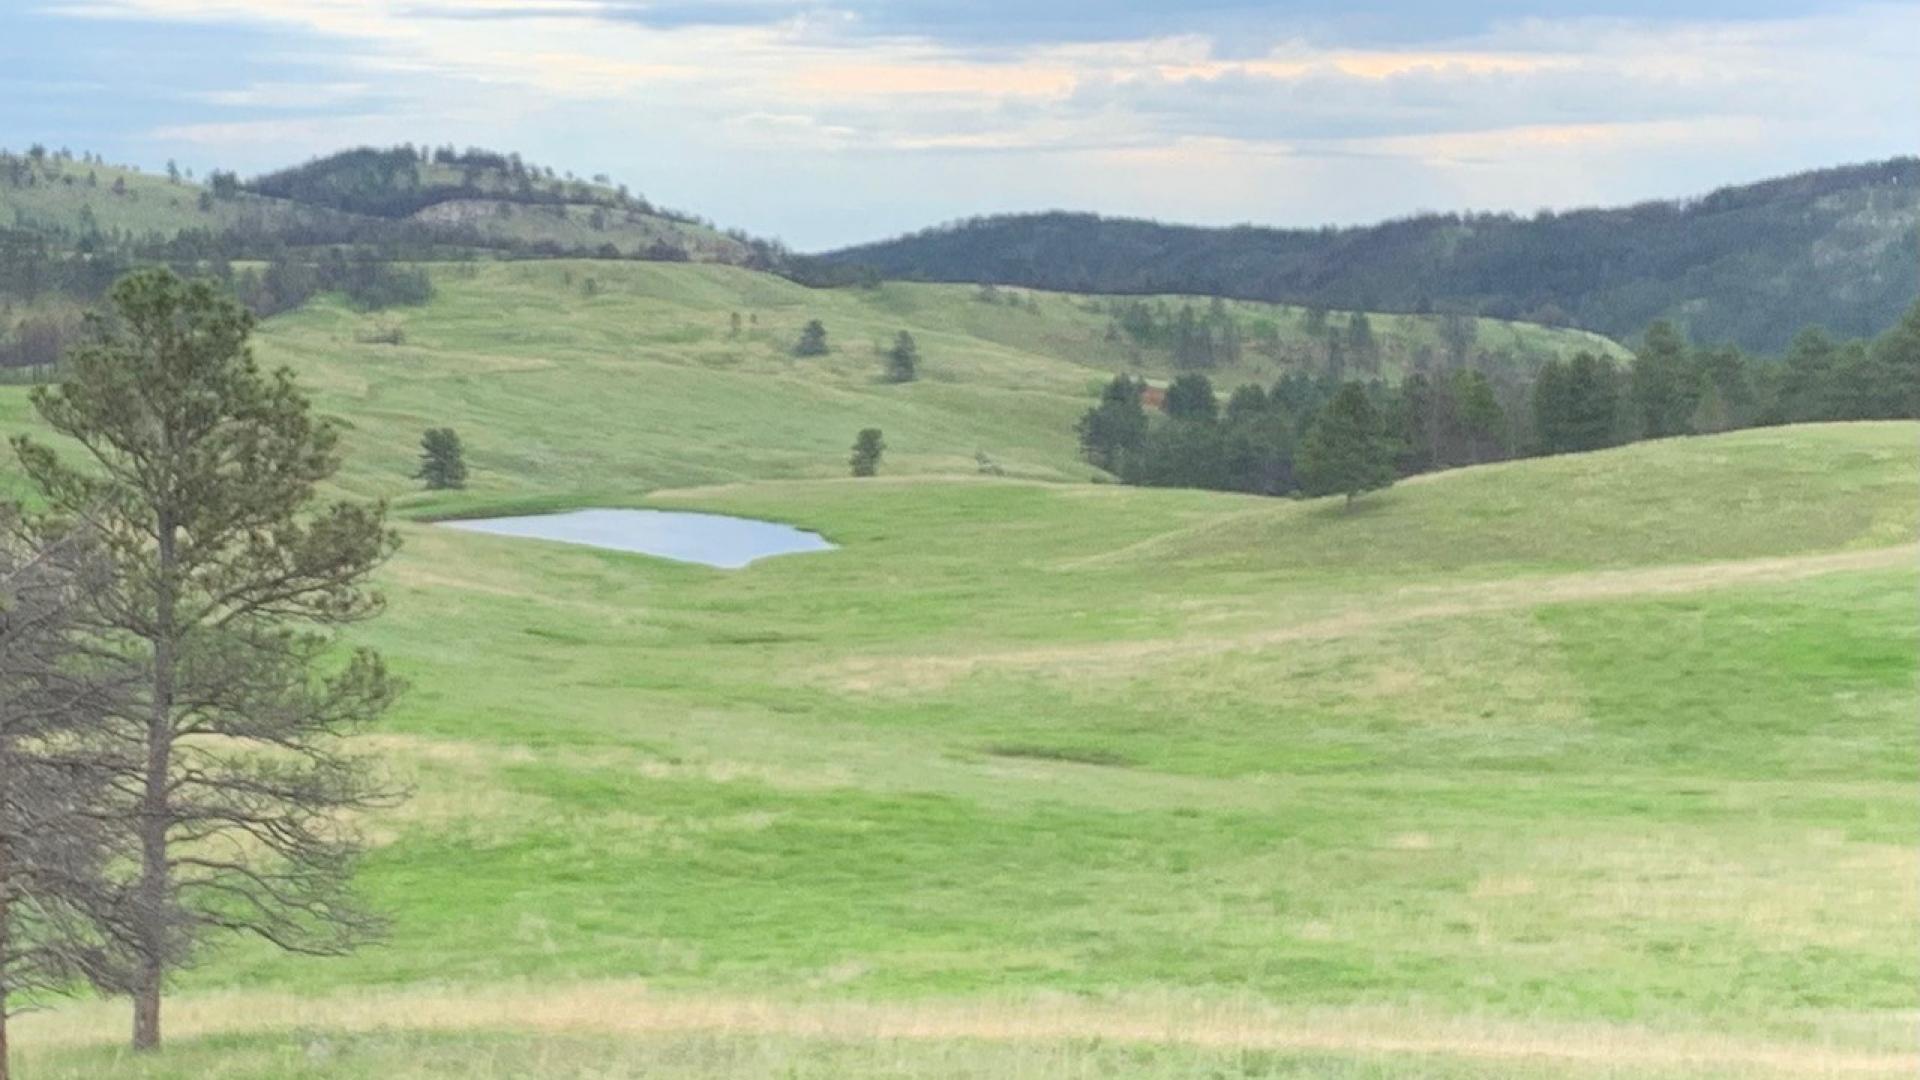 Landscape of Custer State Park, SD